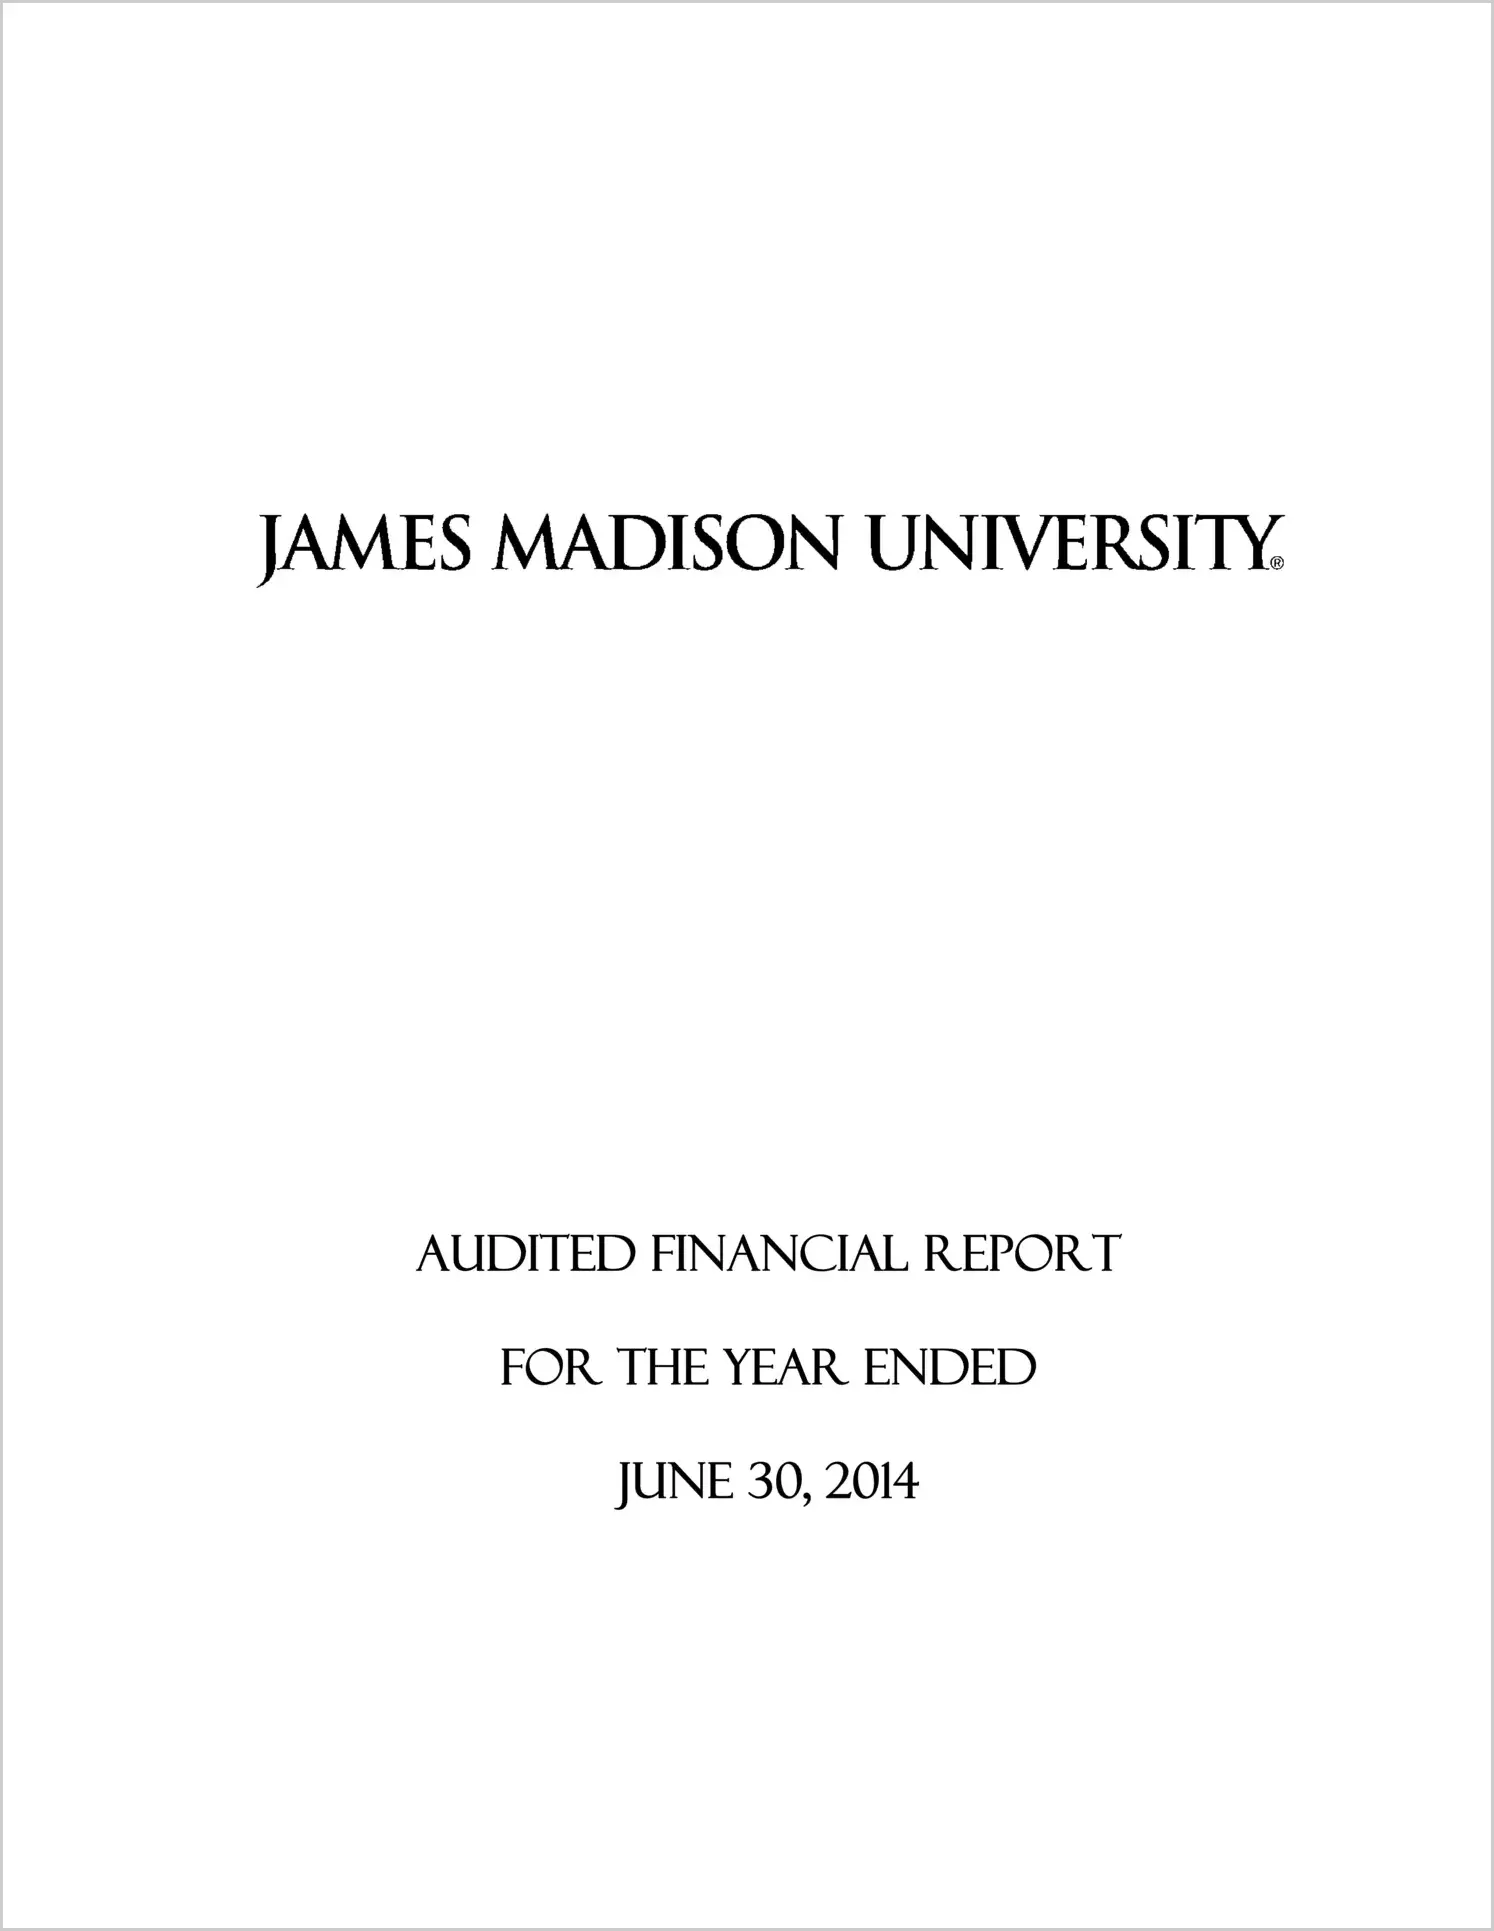 James Madison University Financial Statements for the year ended June 30, 2014